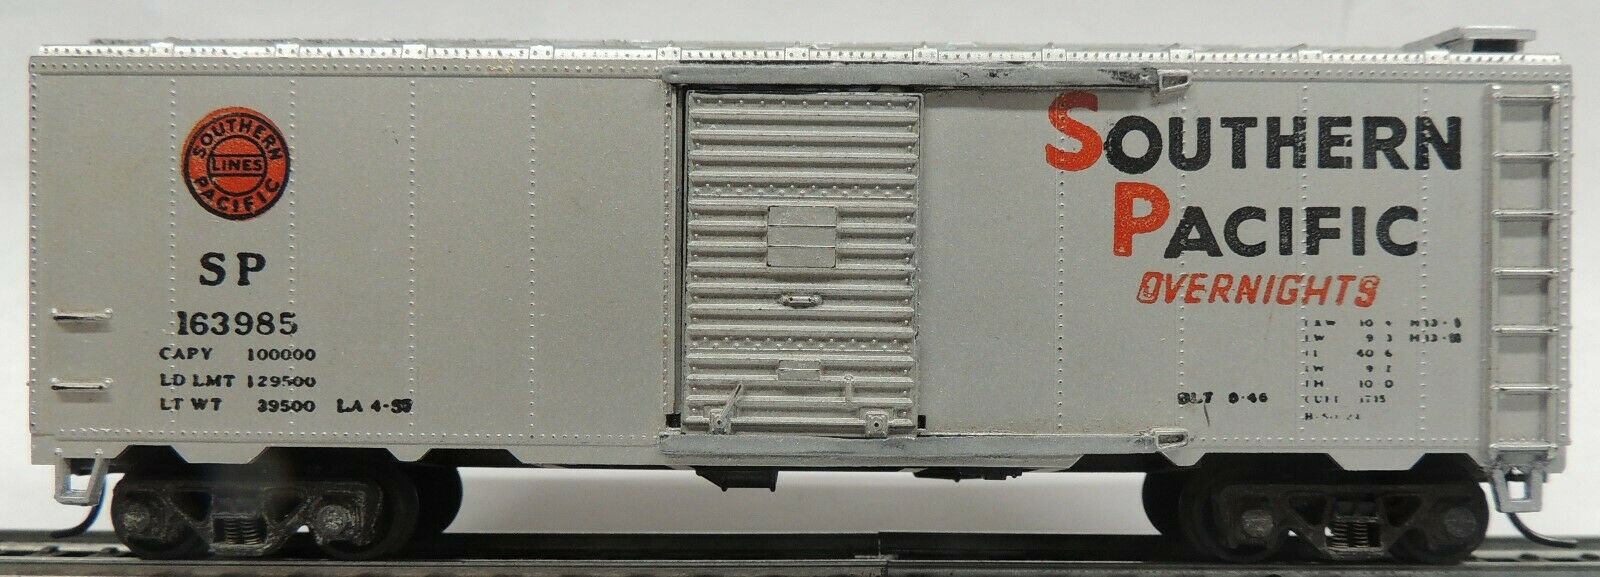 ATHEARN SP OVERNIGHT SILVER 40' BOXCAR RTR ST KD's CAR # 163985  ITEM # 1205